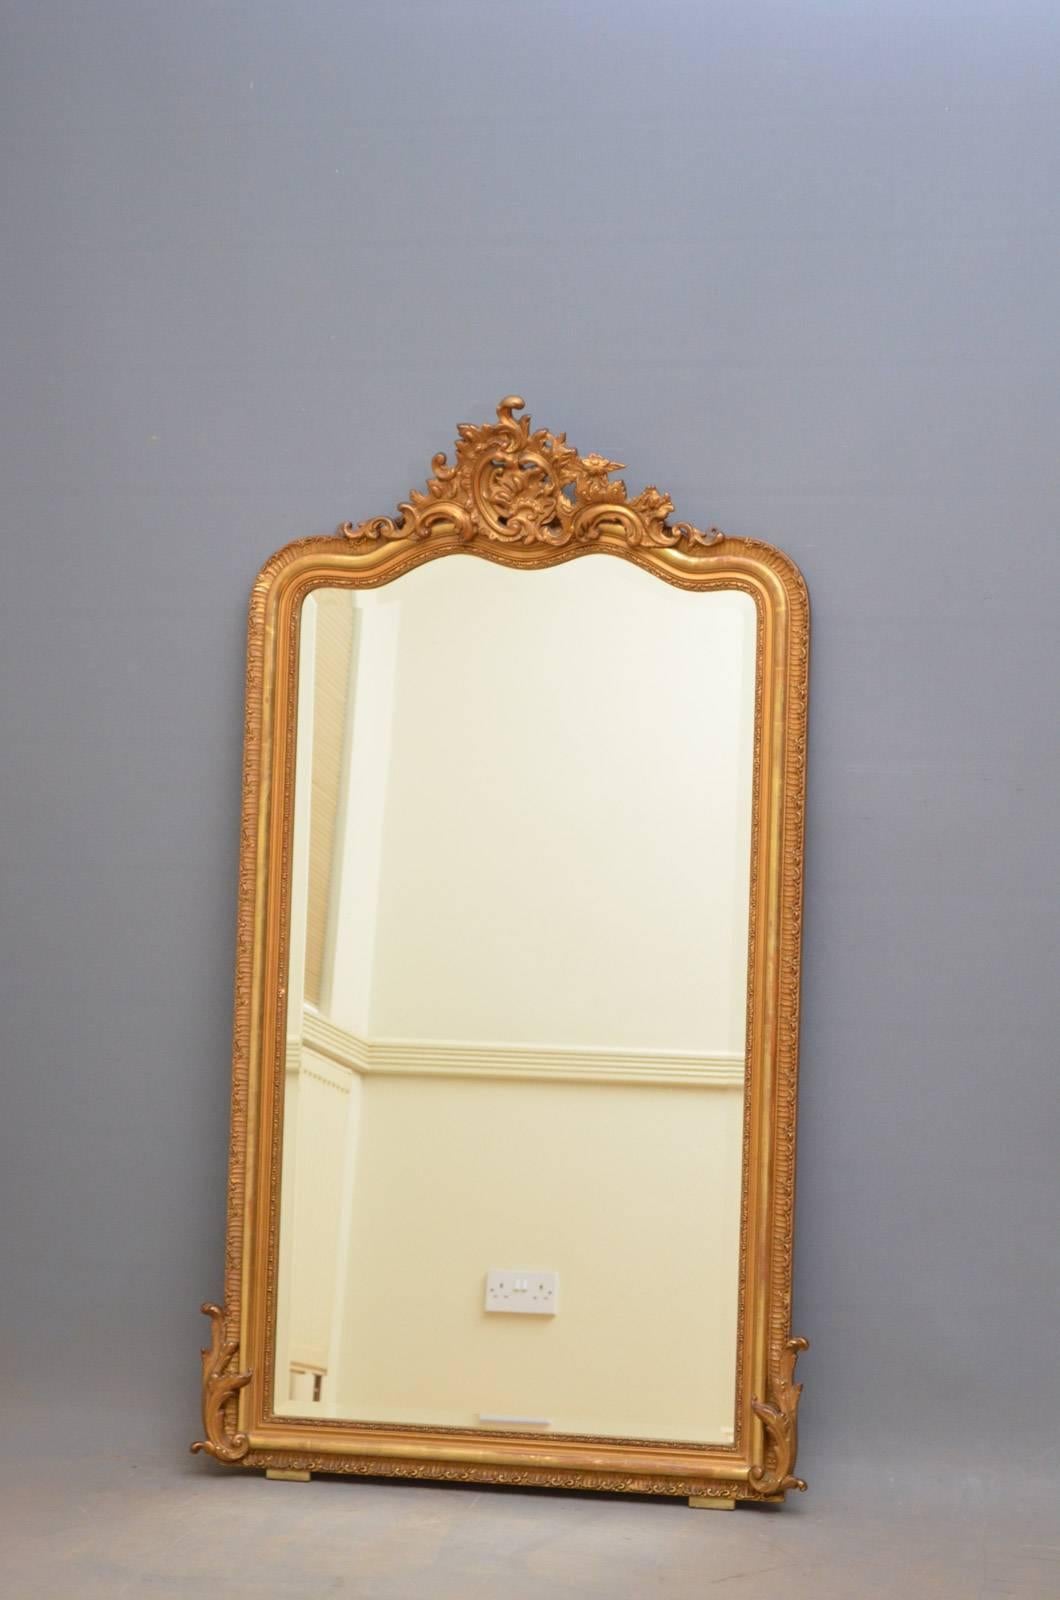 J00 Turn of the century gilt mirror, having finely carved cartouche to centre and original bevelled edge mirror plate with some foxing in carved frame. This antique mirror retains its original gilt, mirror plate and backboards, all in wonderful